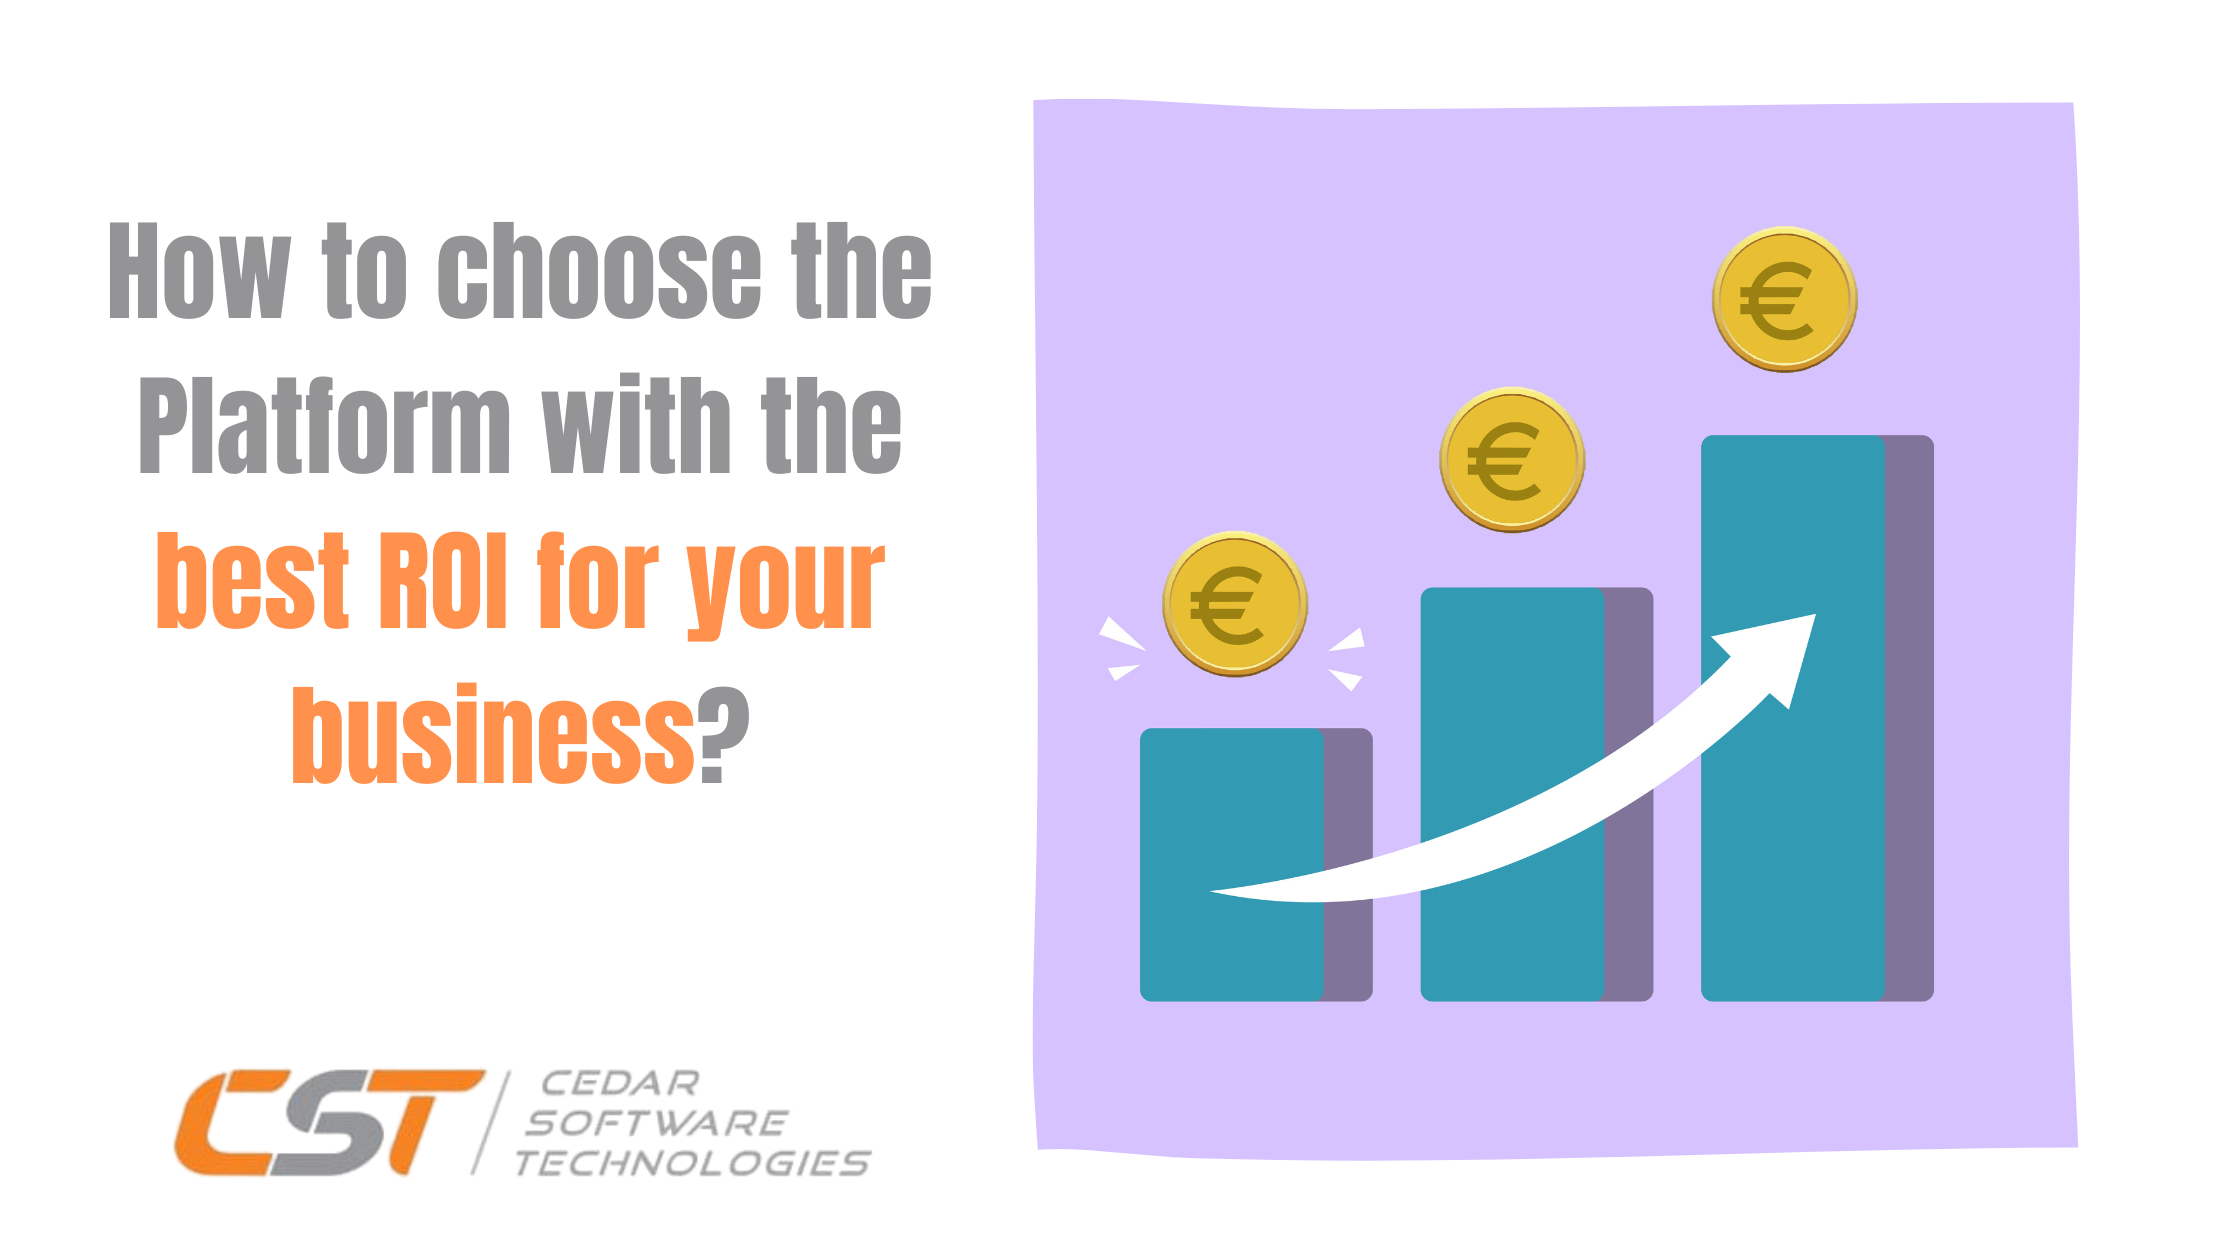 How to choose the Platform with the best ROI for your business?